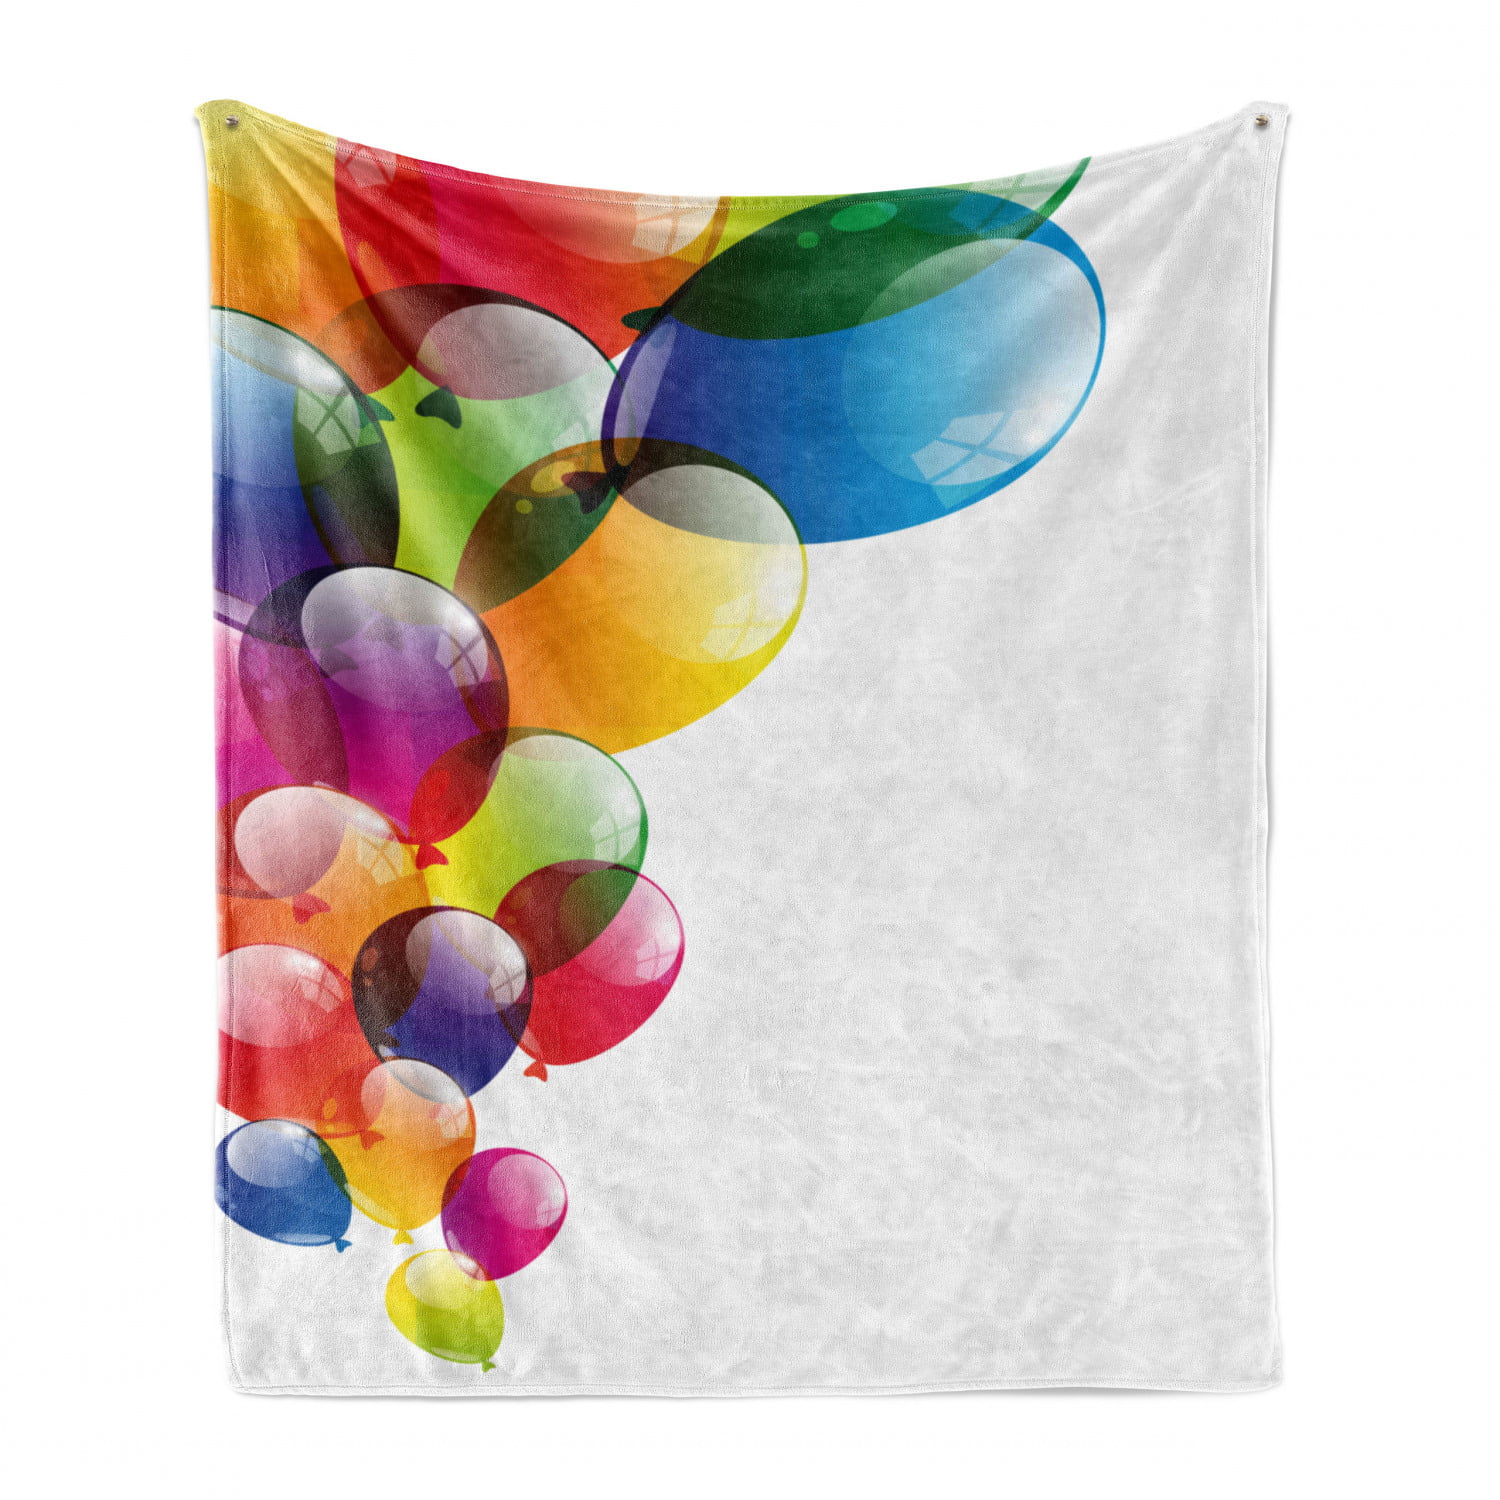 Celebration Colorful Balloons with Reflections Surprise Occasion Joyful Cozy Plush for Indoor and Outdoor Use Multicolor Ambesonne Birthday Soft Flannel Fleece Throw Blanket 50 x 60 